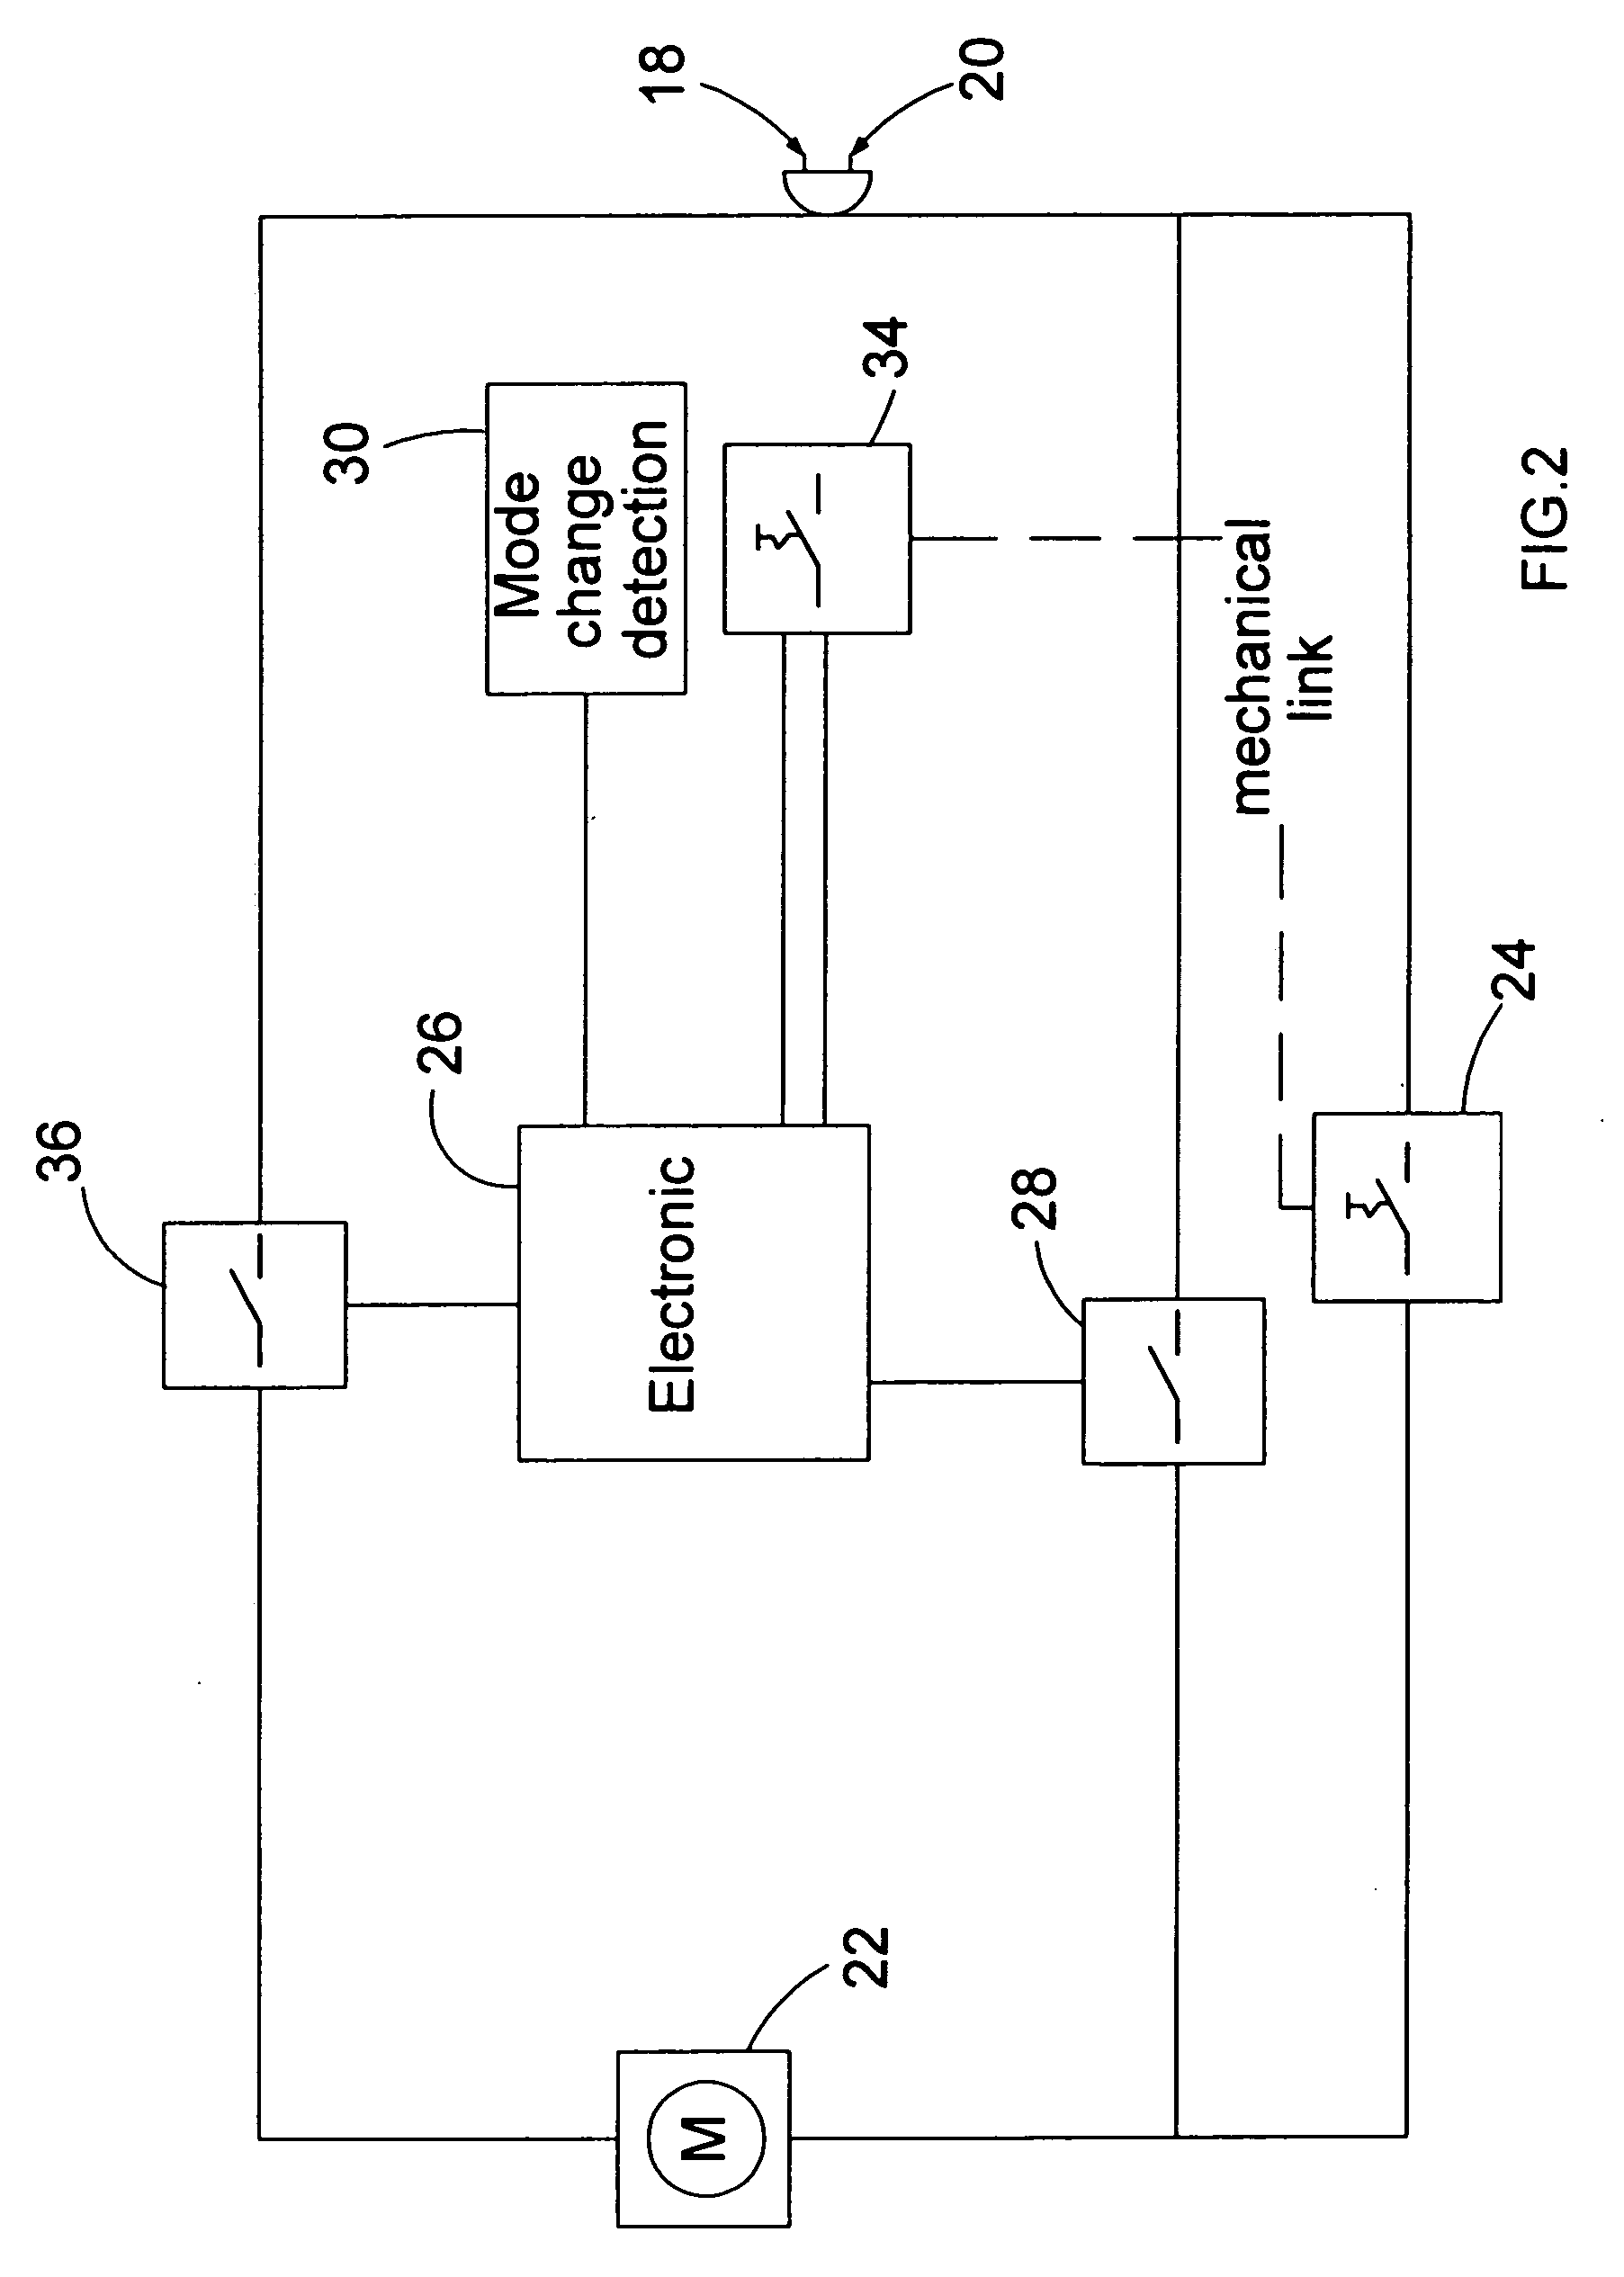 Actuation apparatus for power tool